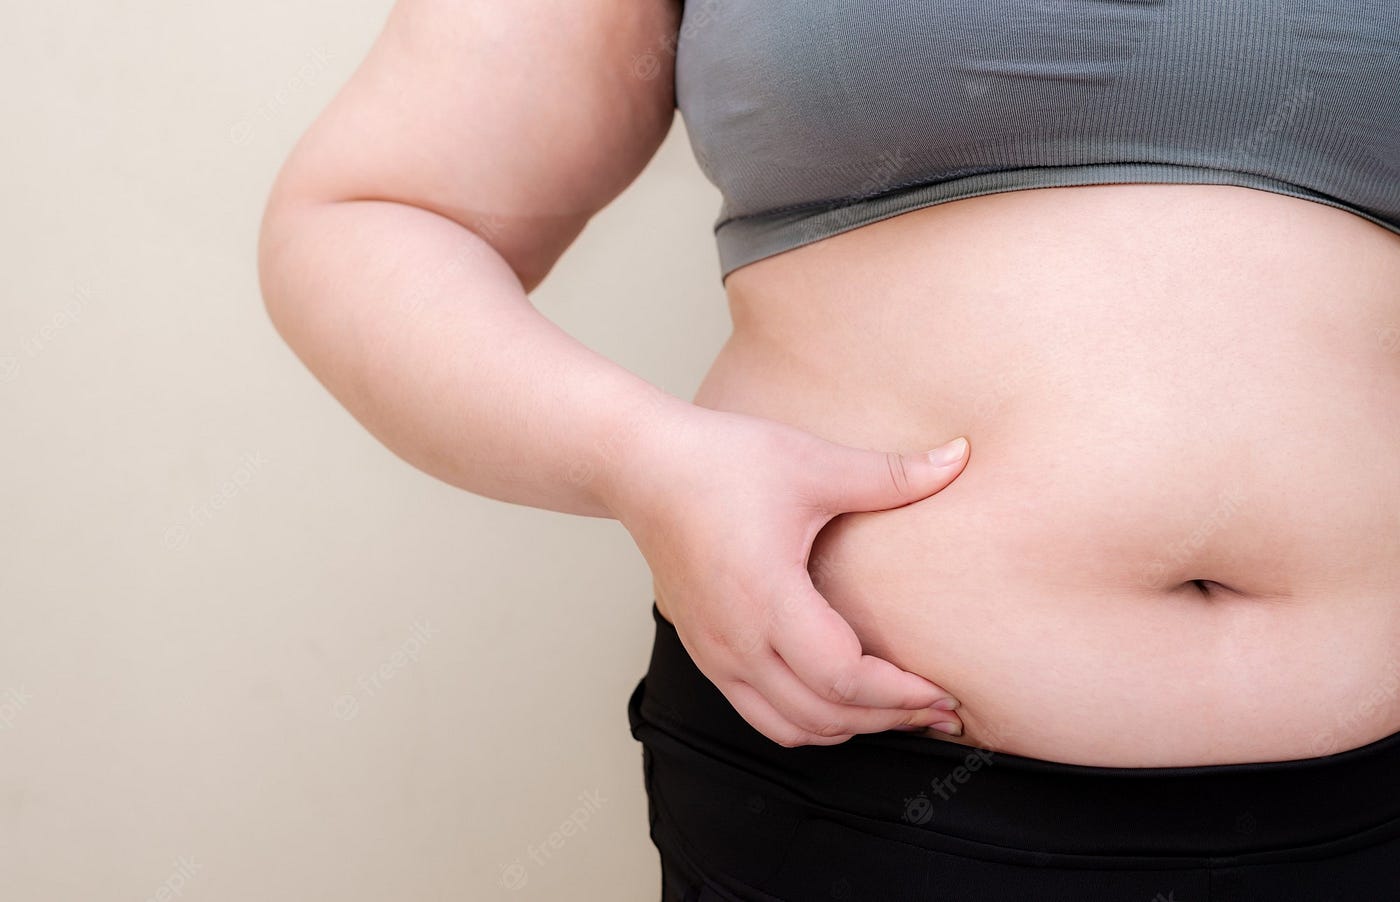 What Causes A Big Belly In Women?